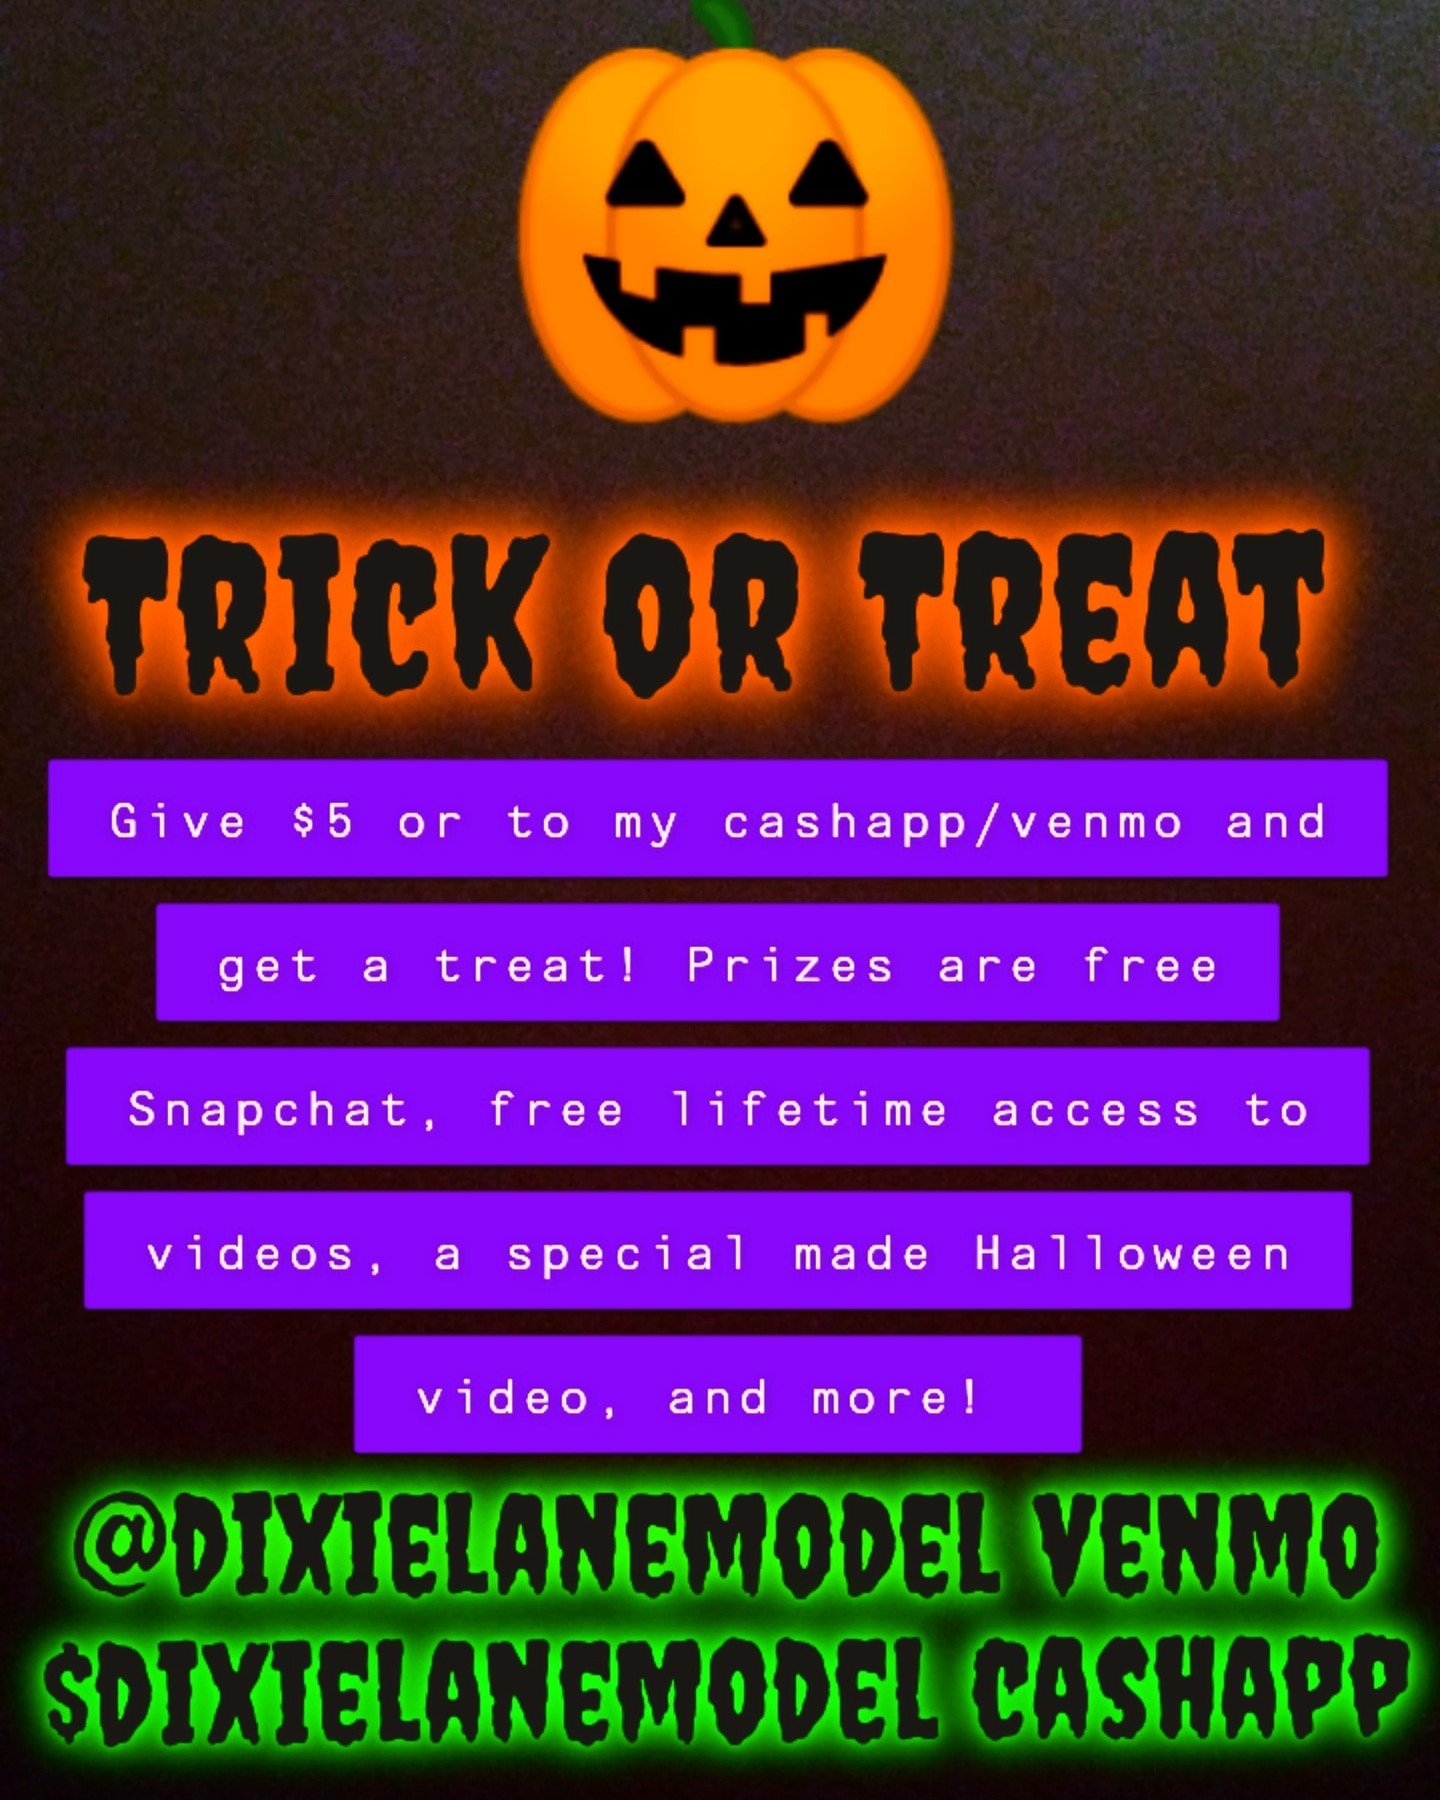 Photo by Modeldixielane with the username @Modeldixielane, who is a star user,  October 29, 2019 at 8:10 PM and the text says 'Trick or Treat! 🎃'